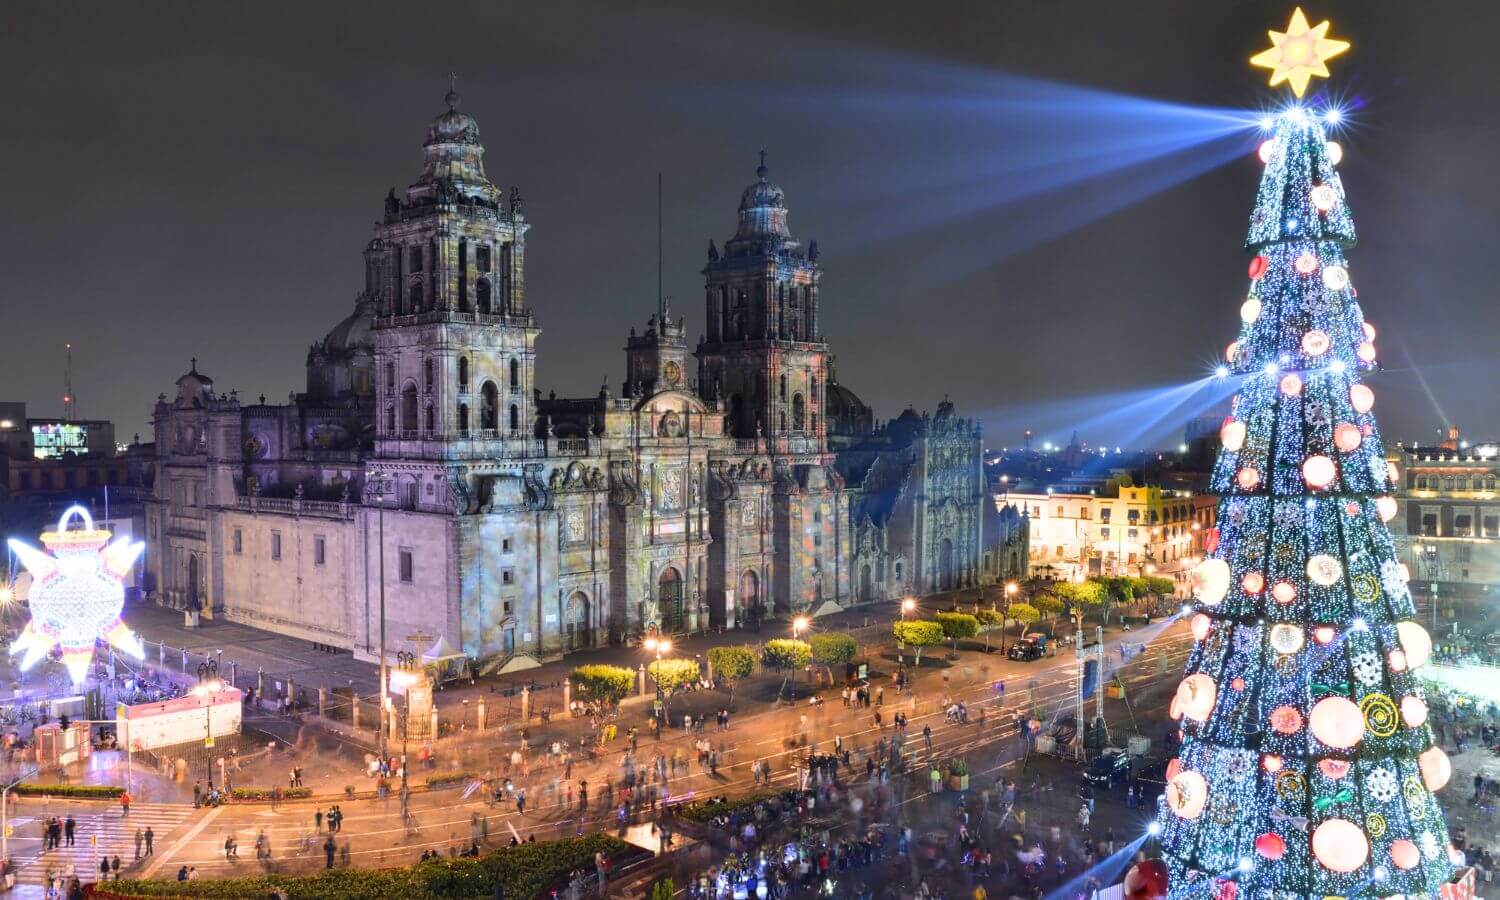 The beautiful Christmas Tree at night in the zocalo of Mexico City